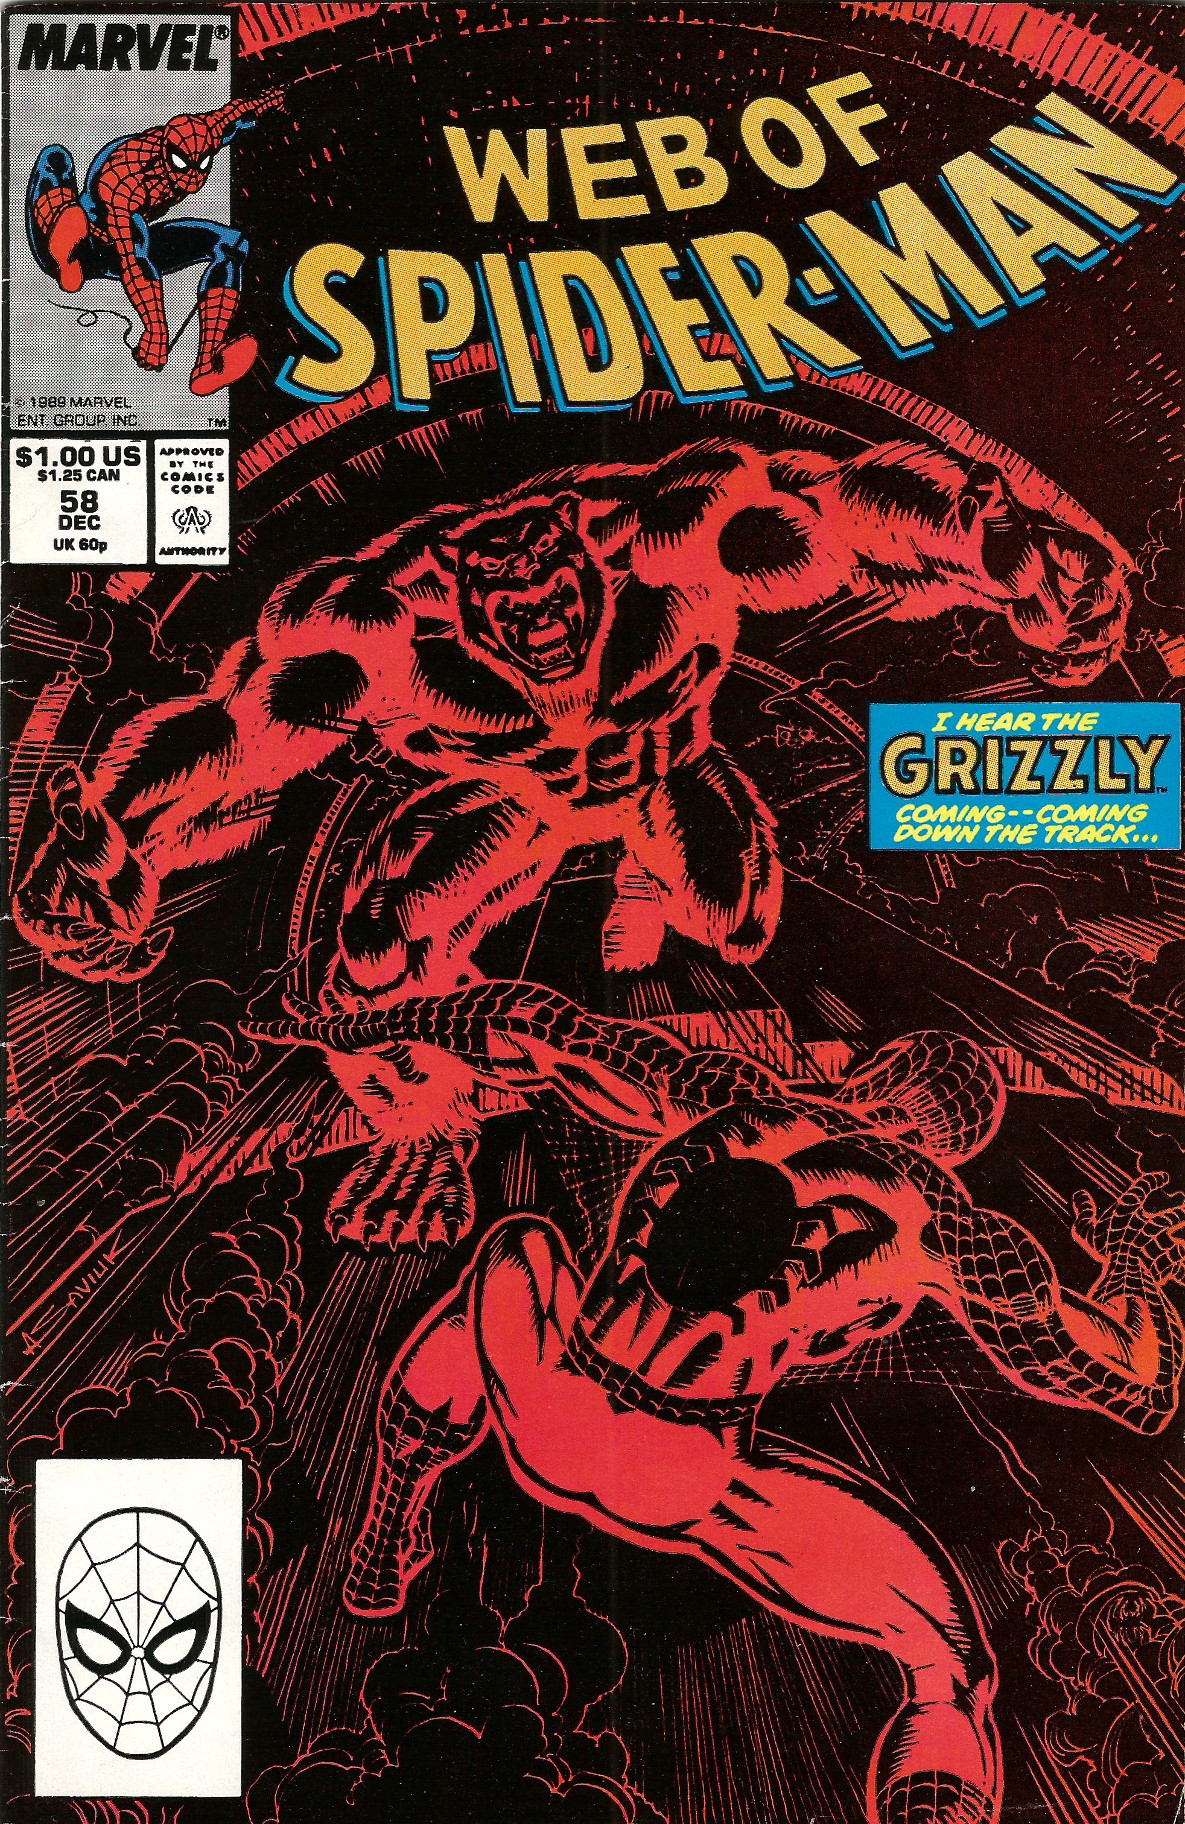 Web Of Spider-Man No. 58 (Marvel Comics, 1989). Cover art by Alex Saviuk.From a charity